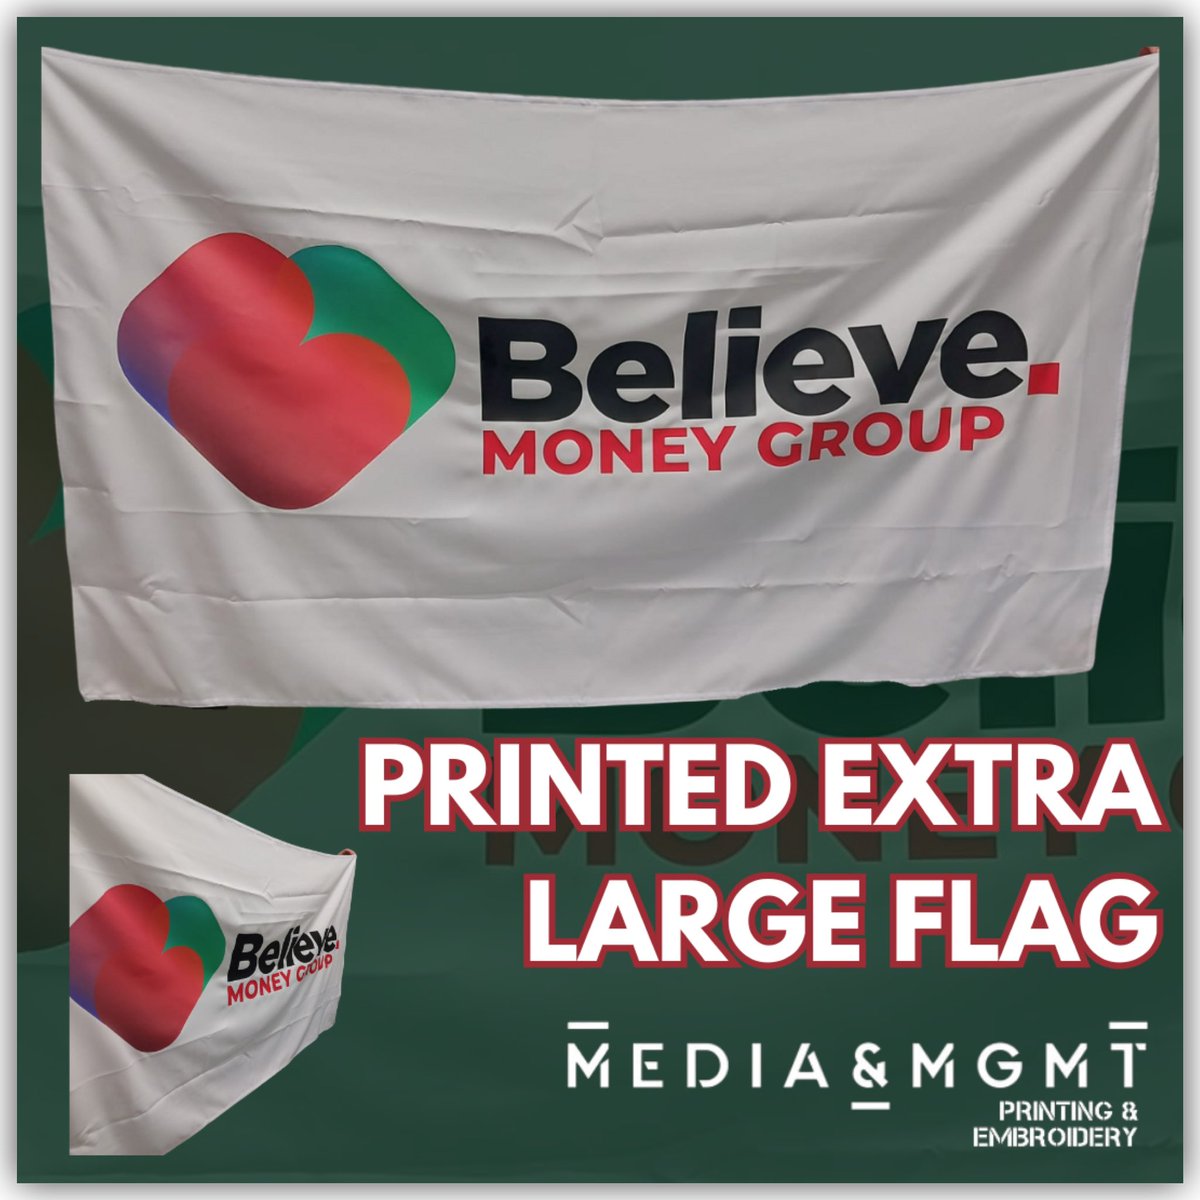 Printed extra large flag for Believe Money Group 🙌🏽 mgmt-print.co.uk #trophies #sportstrophies #footballtrophies #dancingtrophies #trophy #awards #mediamgmtprintingandembroidery #printing #dancewear #doncasterisgreat #customprints #doncasterbusiness #logoprinting